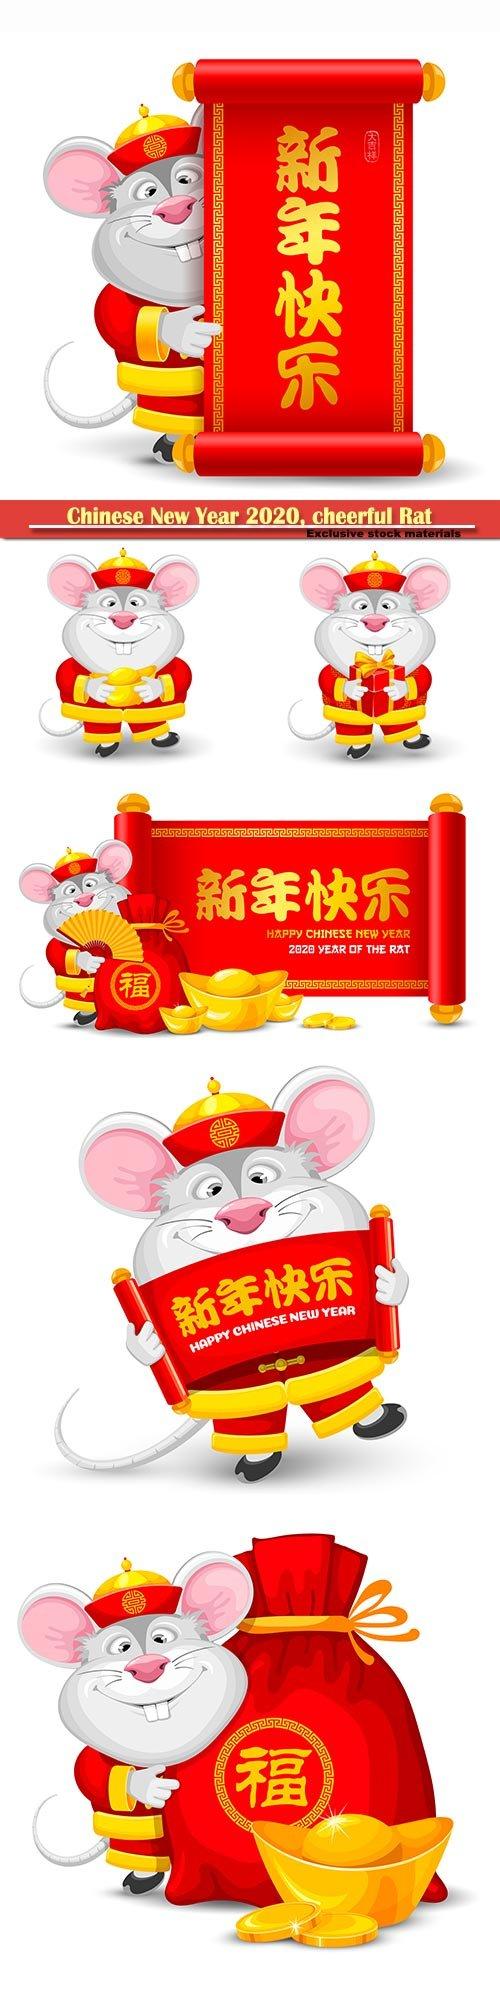 Chinese New Year cheerful Rat as symbol of new 2020